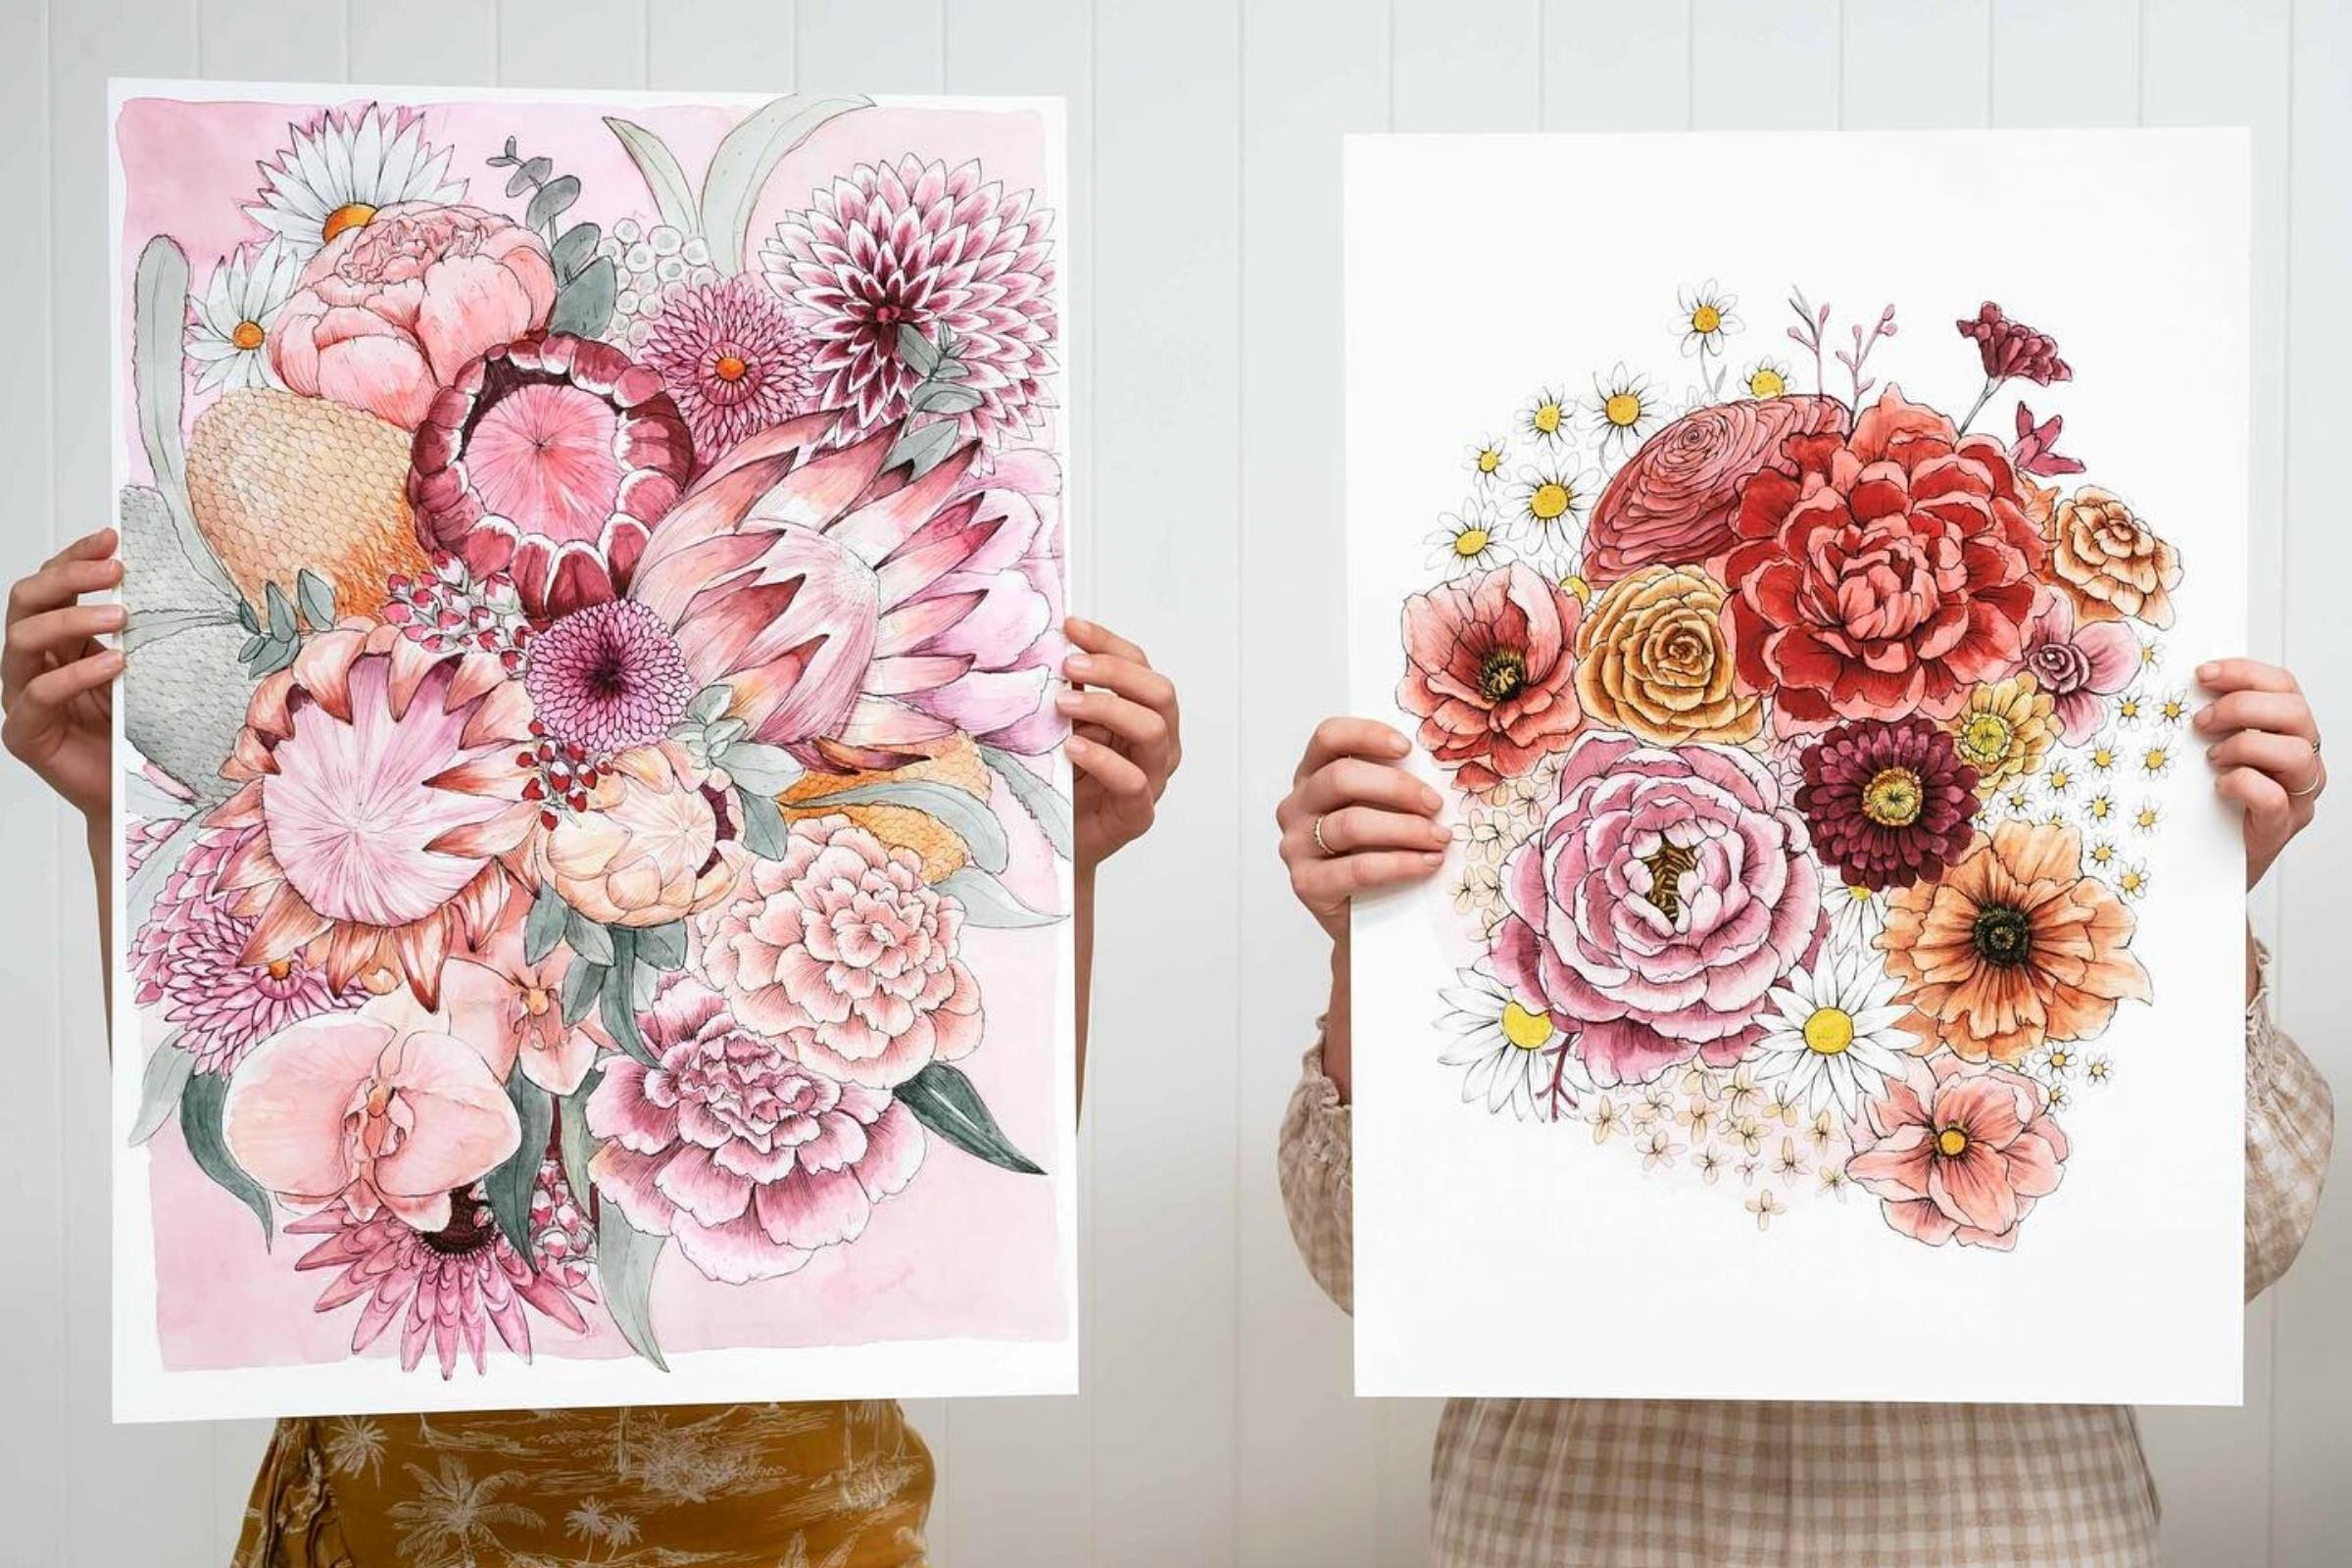 Thursd Wide Feature Florist Emma Morgen Let's Her Love for Wildflowers Inspire Her Illustrations